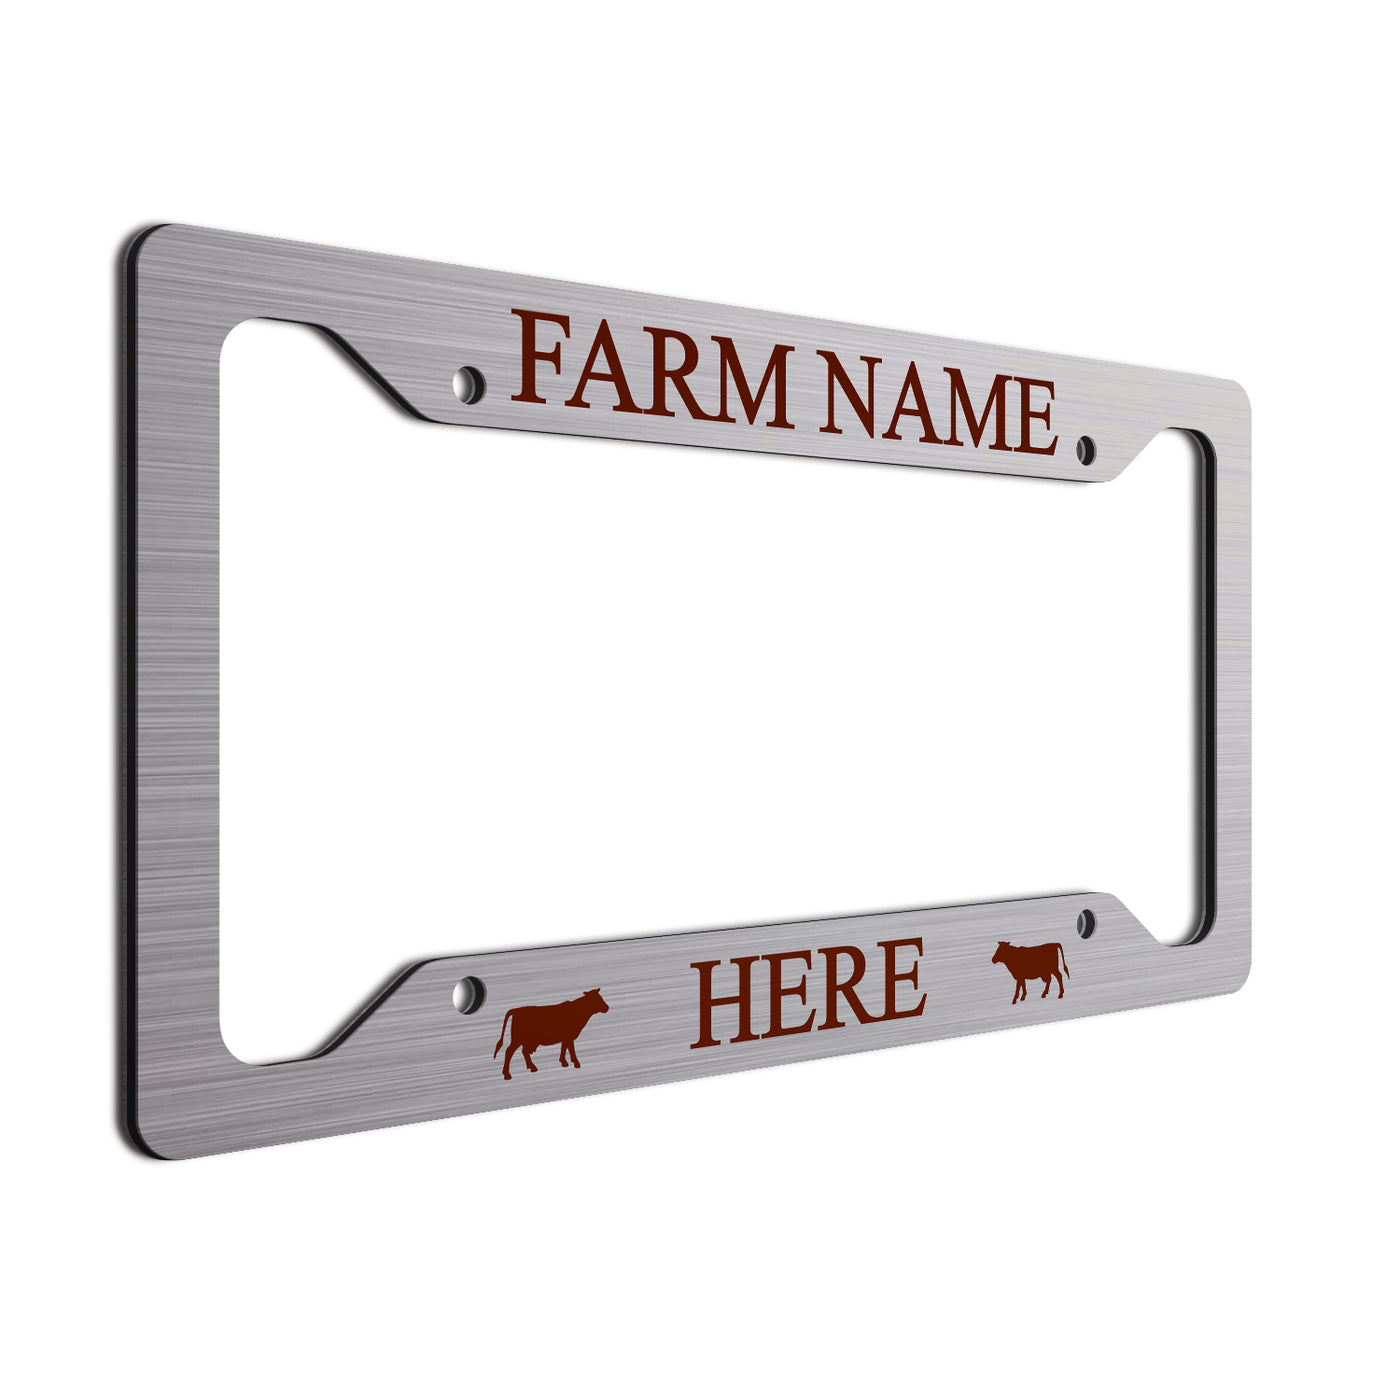 Burgundy Cows and font on brushed finish